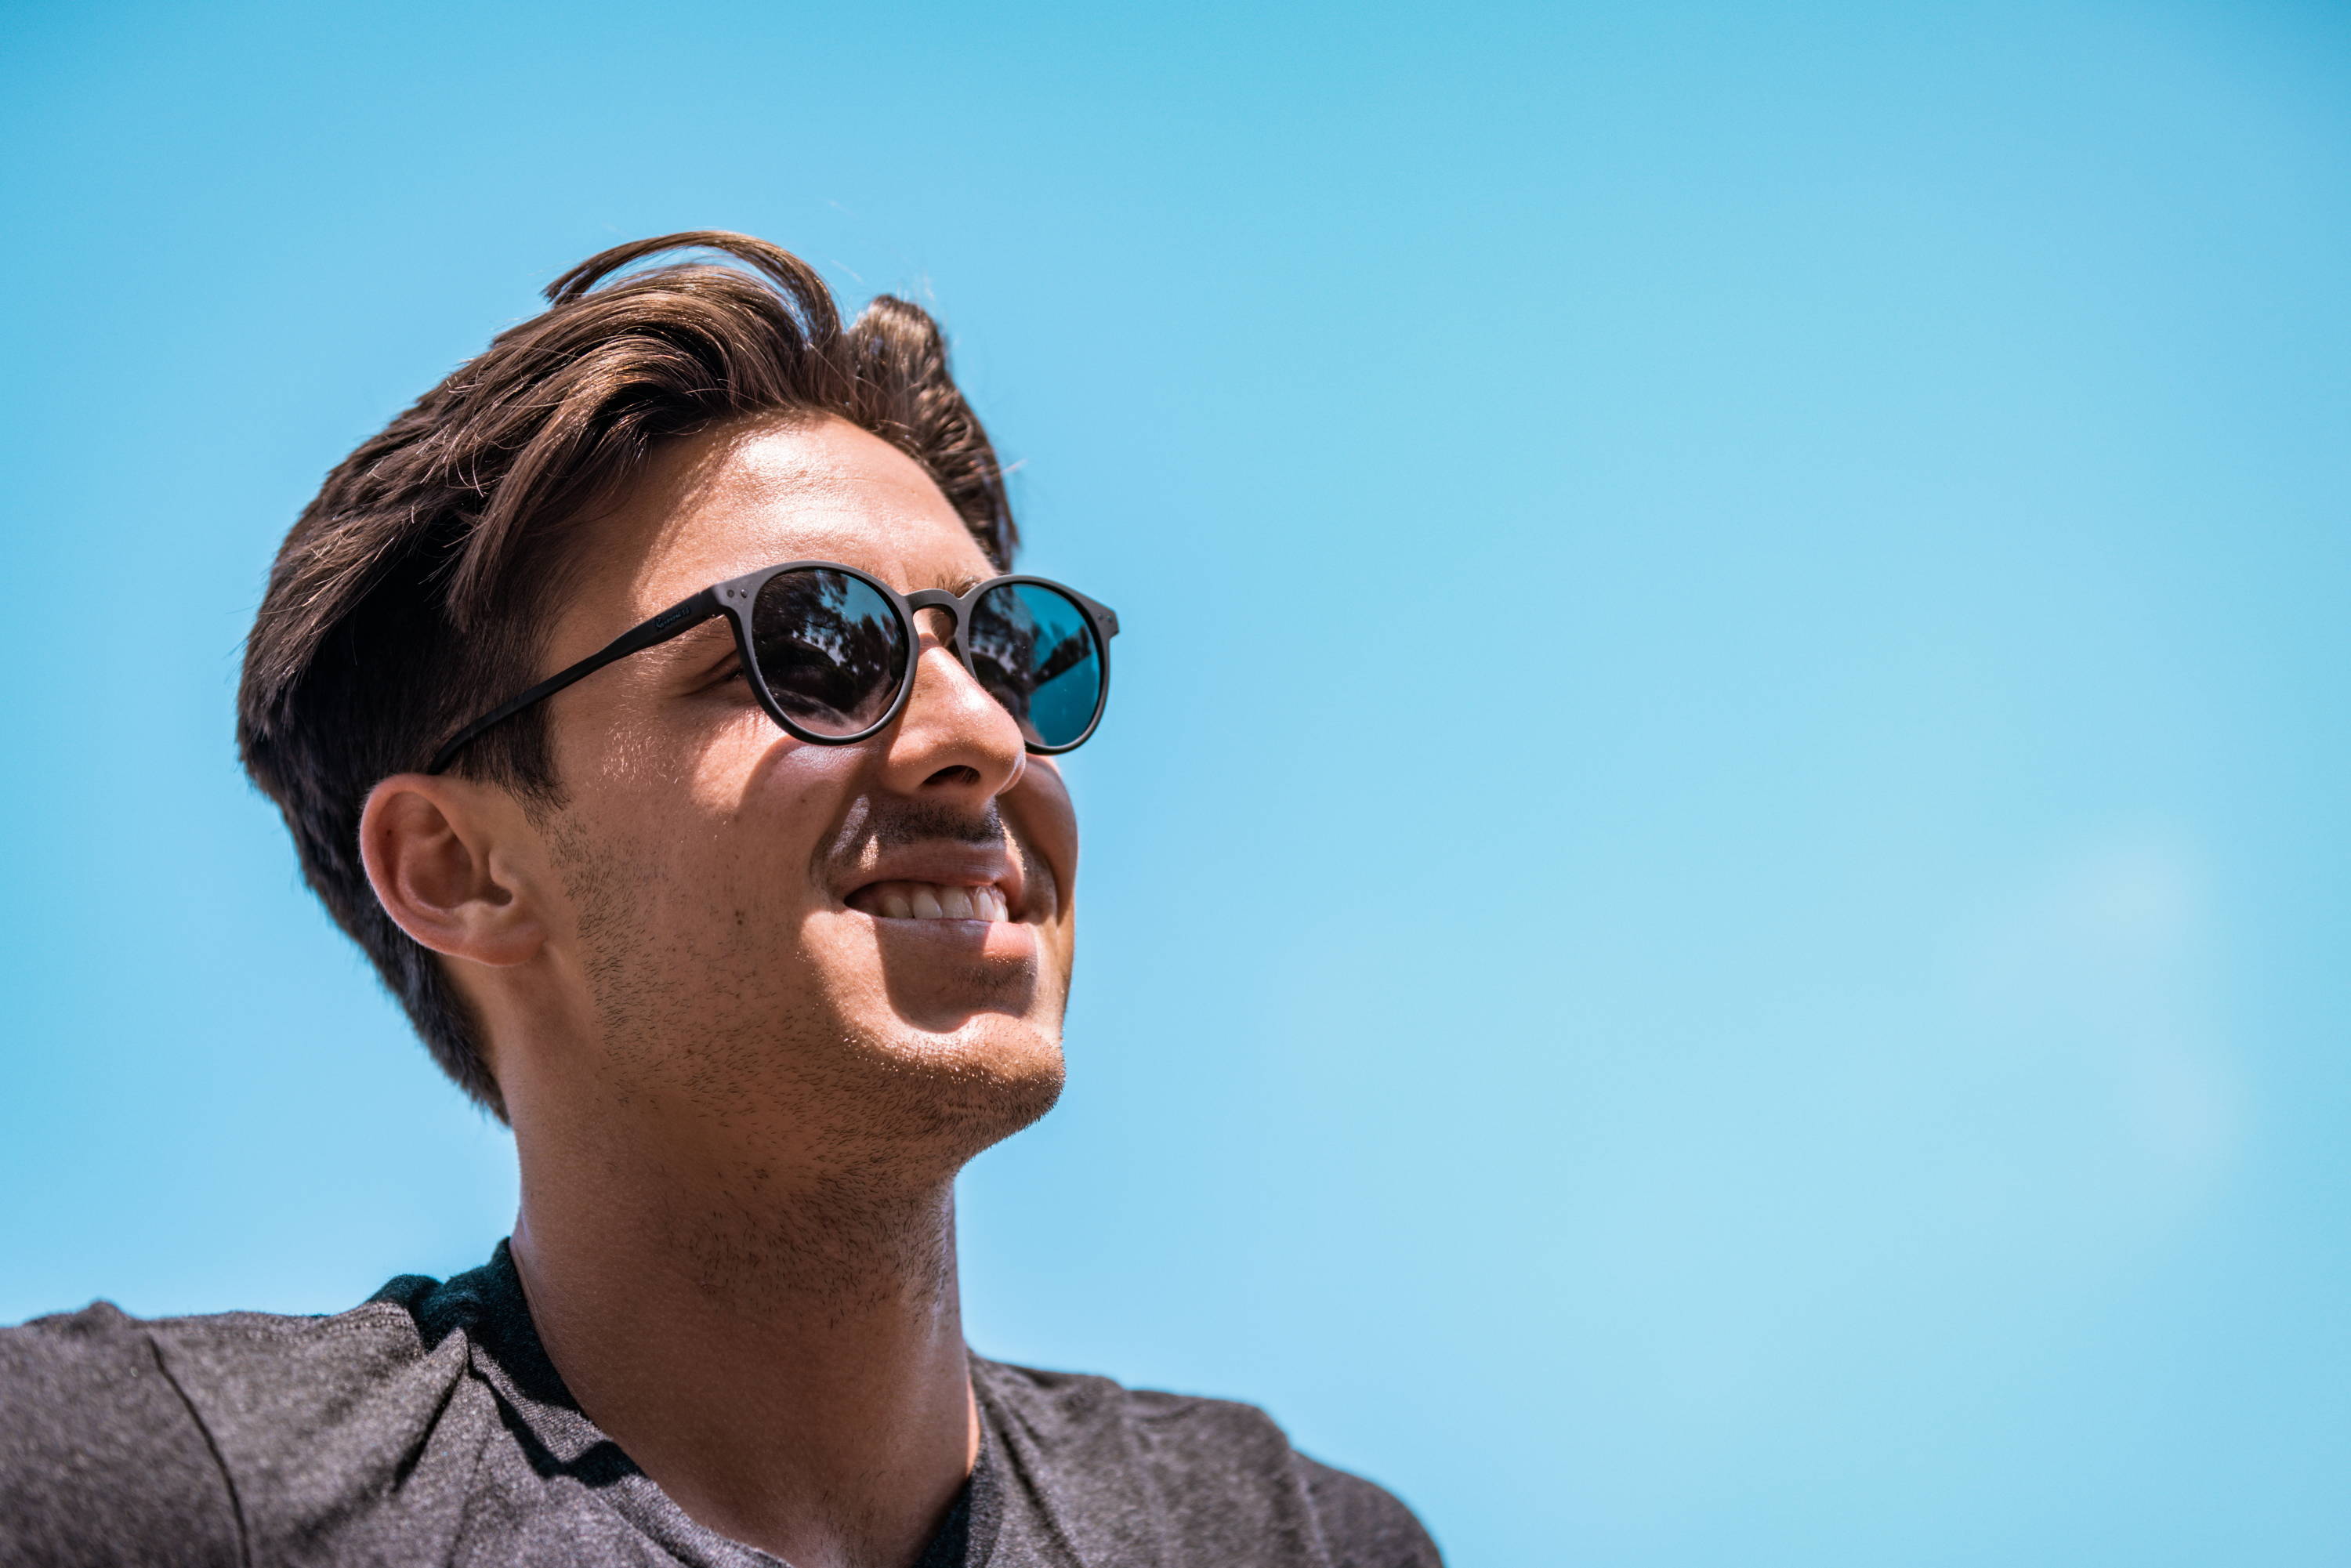 Man wearing black sunglasses on a sunny day